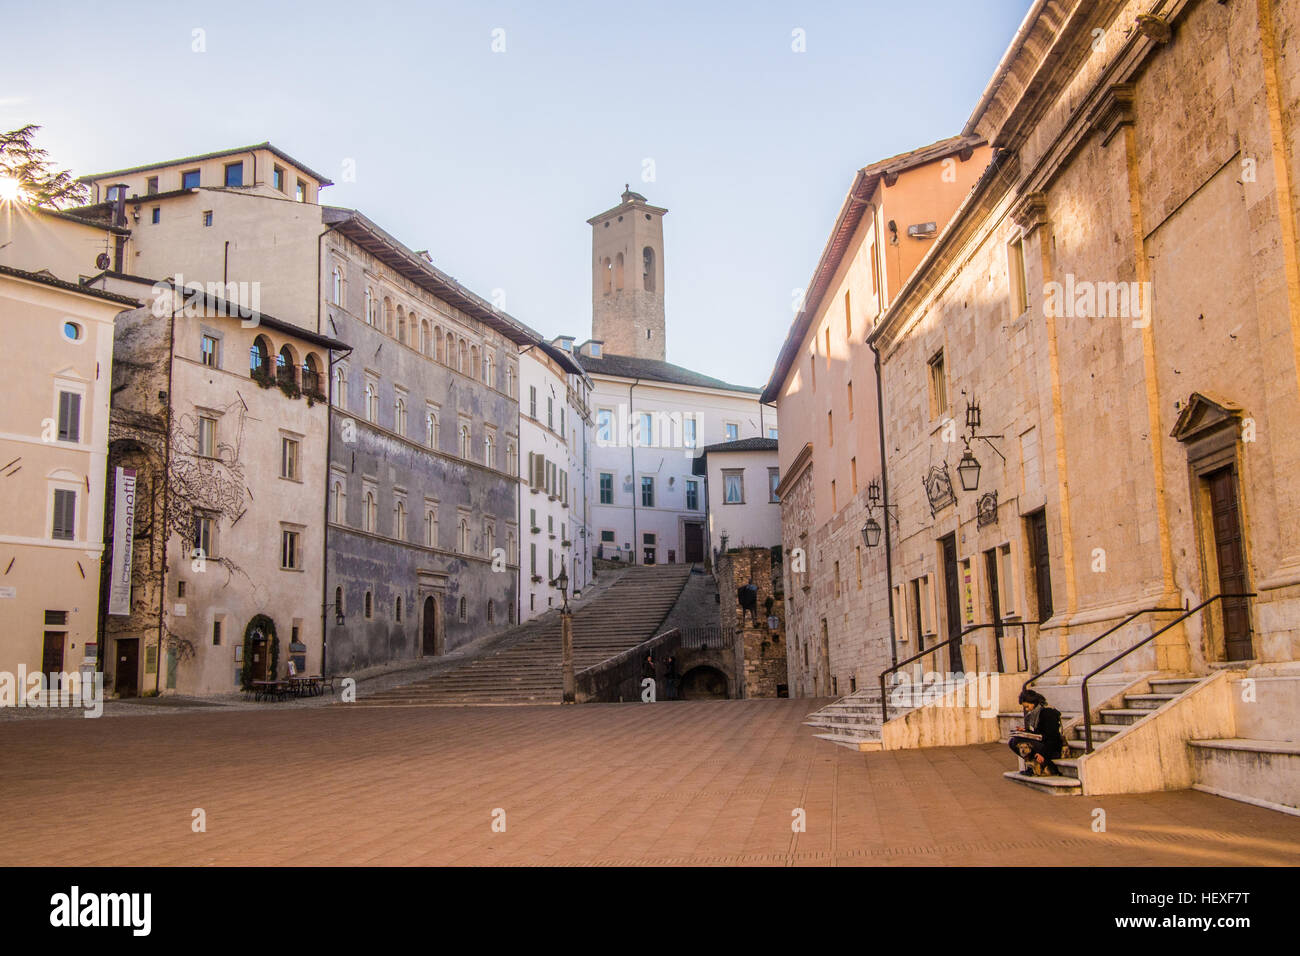 Piazza in front of the Cathedral in Spoleto, an ancient town, Perugia province, Umbria region, Italy. Stock Photo